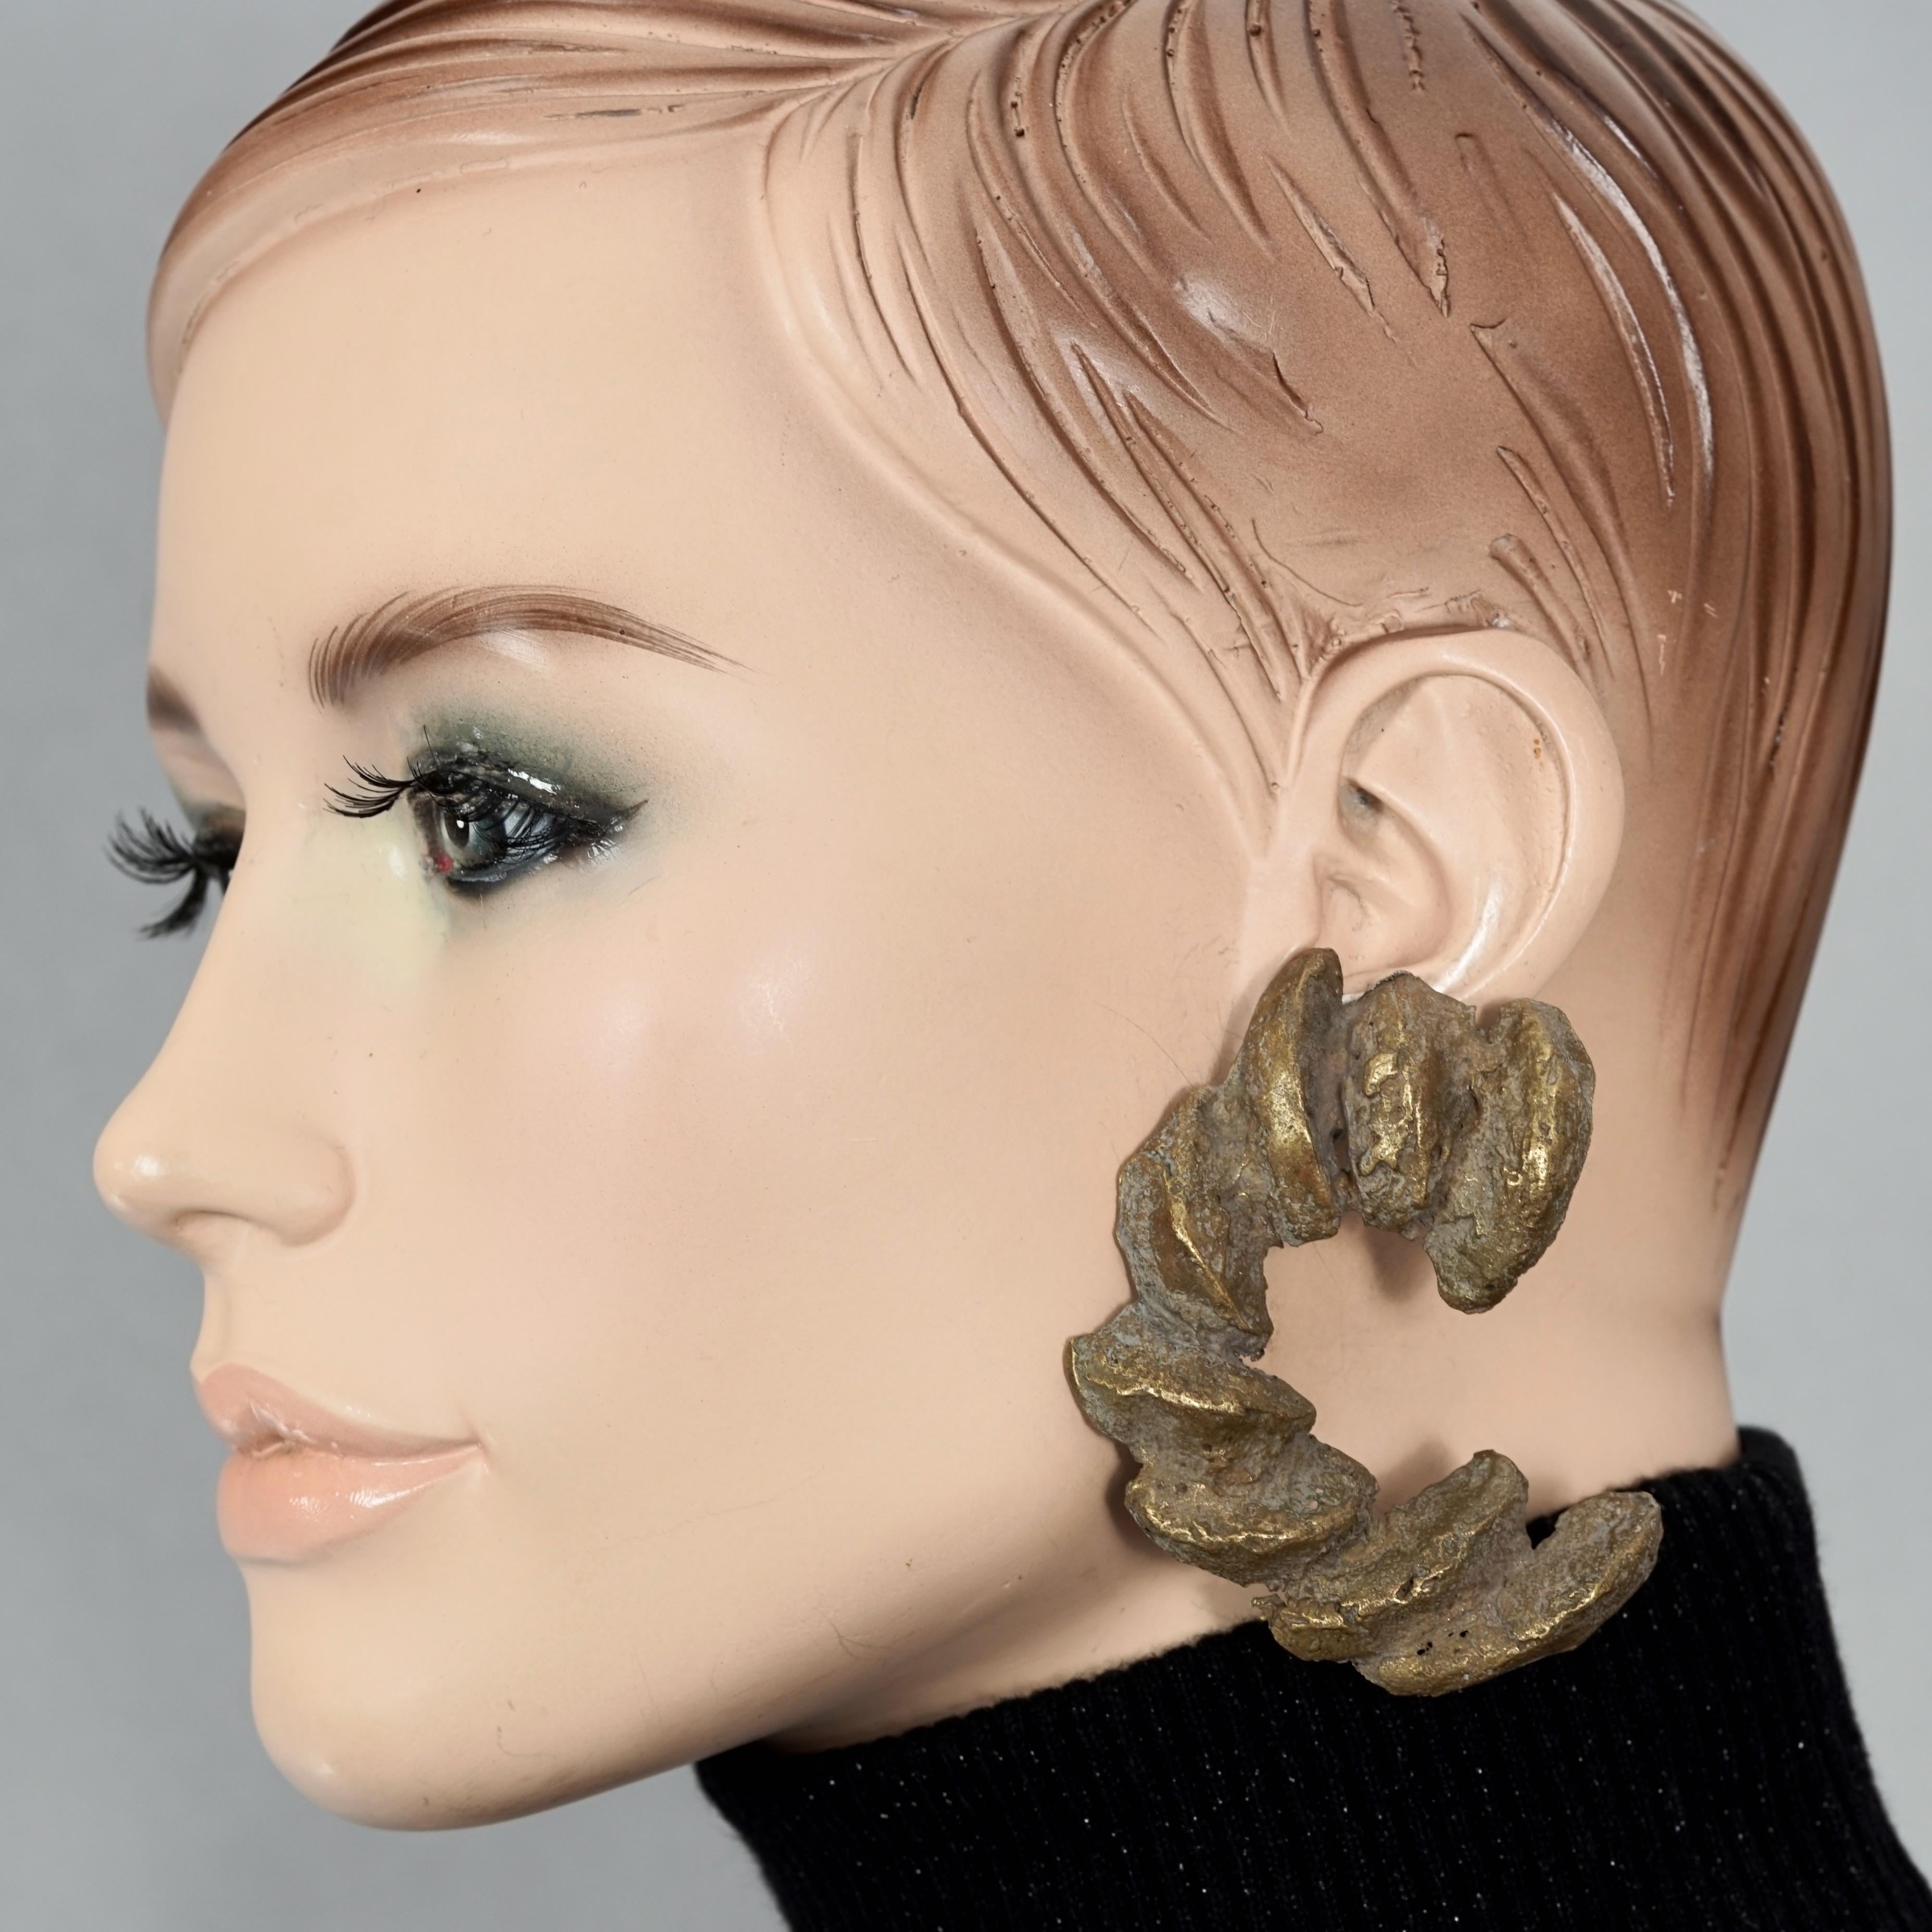 Vintage CHRISTIAN LACROIX by Christiane BILLET Sculptured Croissant Earrings

Measurements:
Height : 2.87 inches (7.3 cm)
Width: 2.36 inches (6 cm)
Weight per Earring: 35 grams

Features:
- 100% Authentic CHRISTIAN LACROIX by CHRISTIANE BILLET.
-